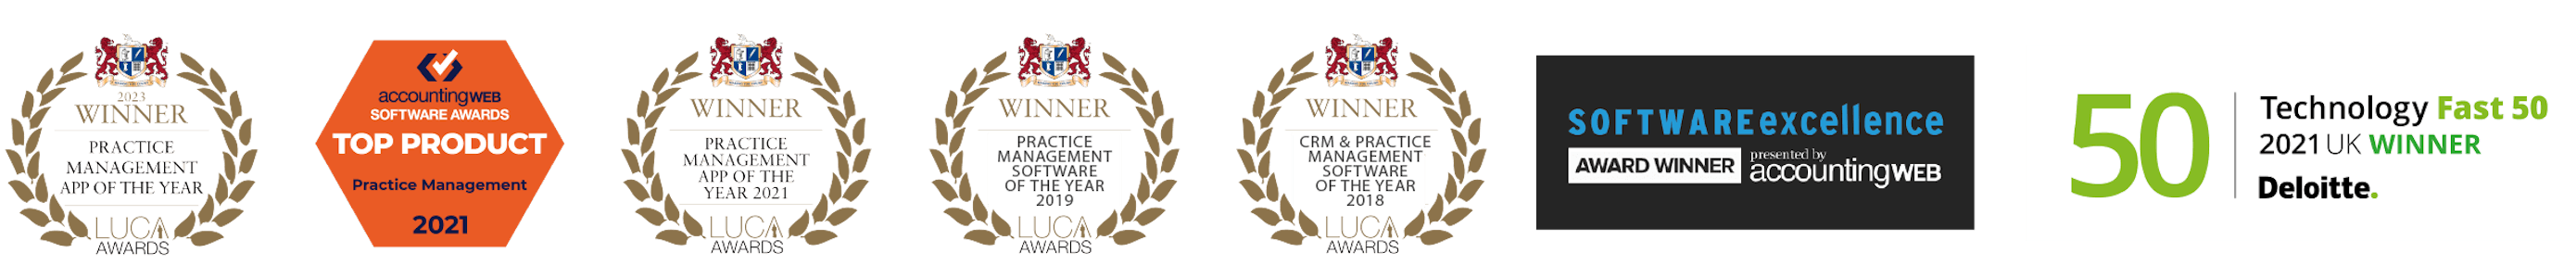 accountancymanager and brightmanager awards won award winning practice management solution